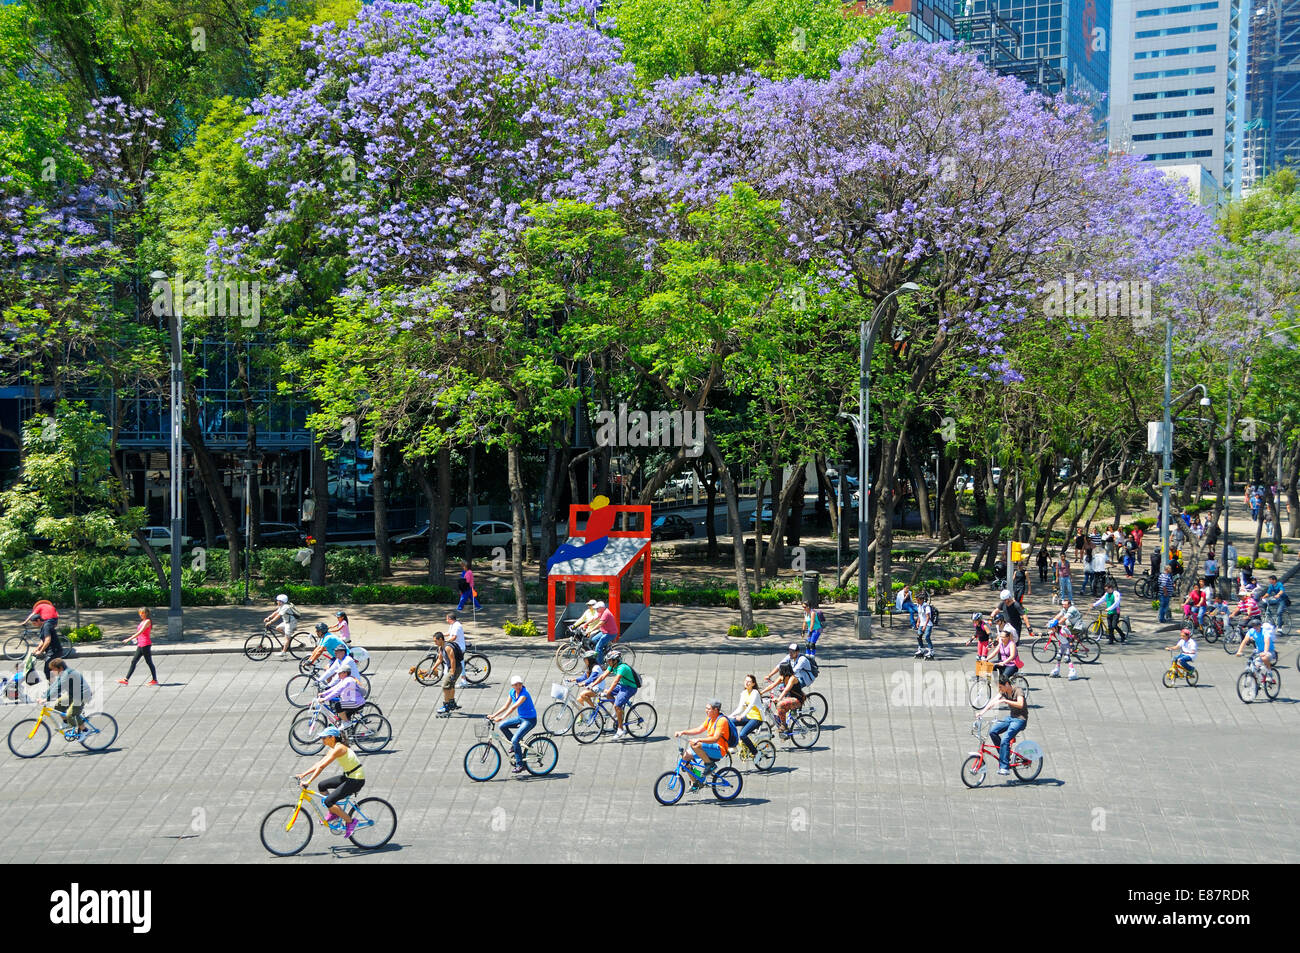 Cyclists on the main street Paseo de Reforma, in front of blooming jacaranda trees, car-free Sunday, Mexico City Stock Photo